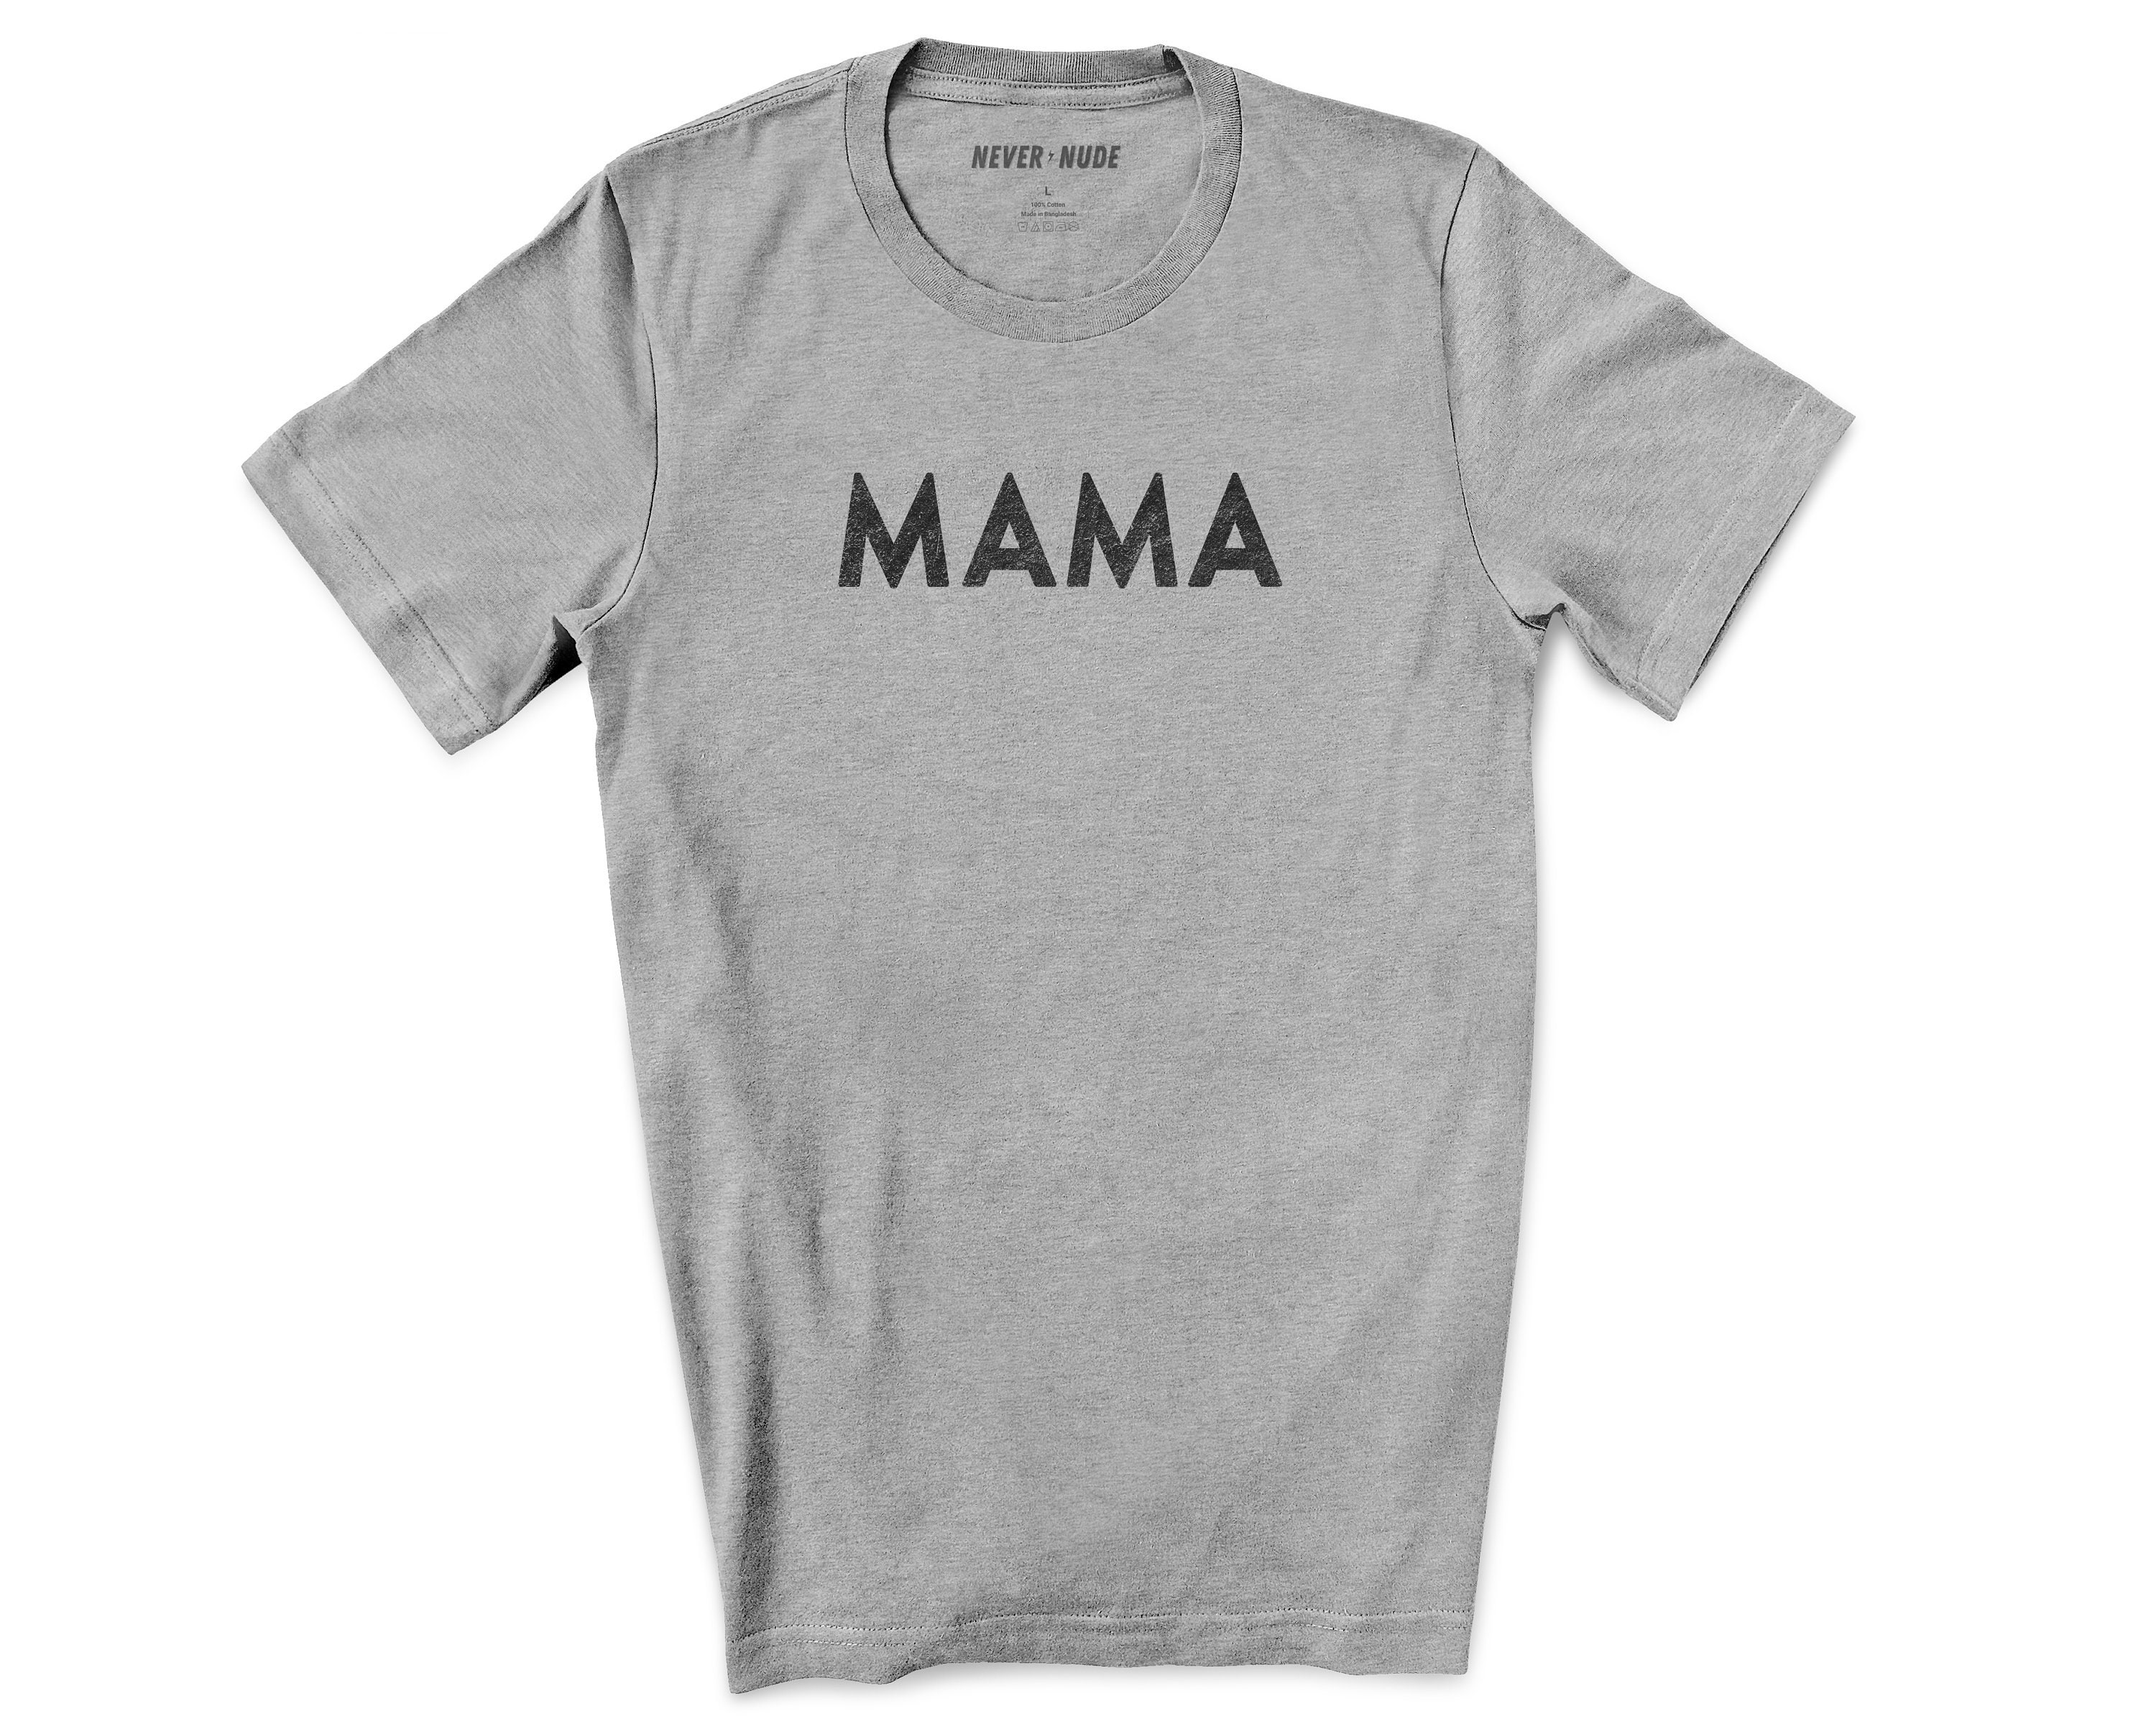 Mama tshirt Daughter mom gift Mothers day | Etsy